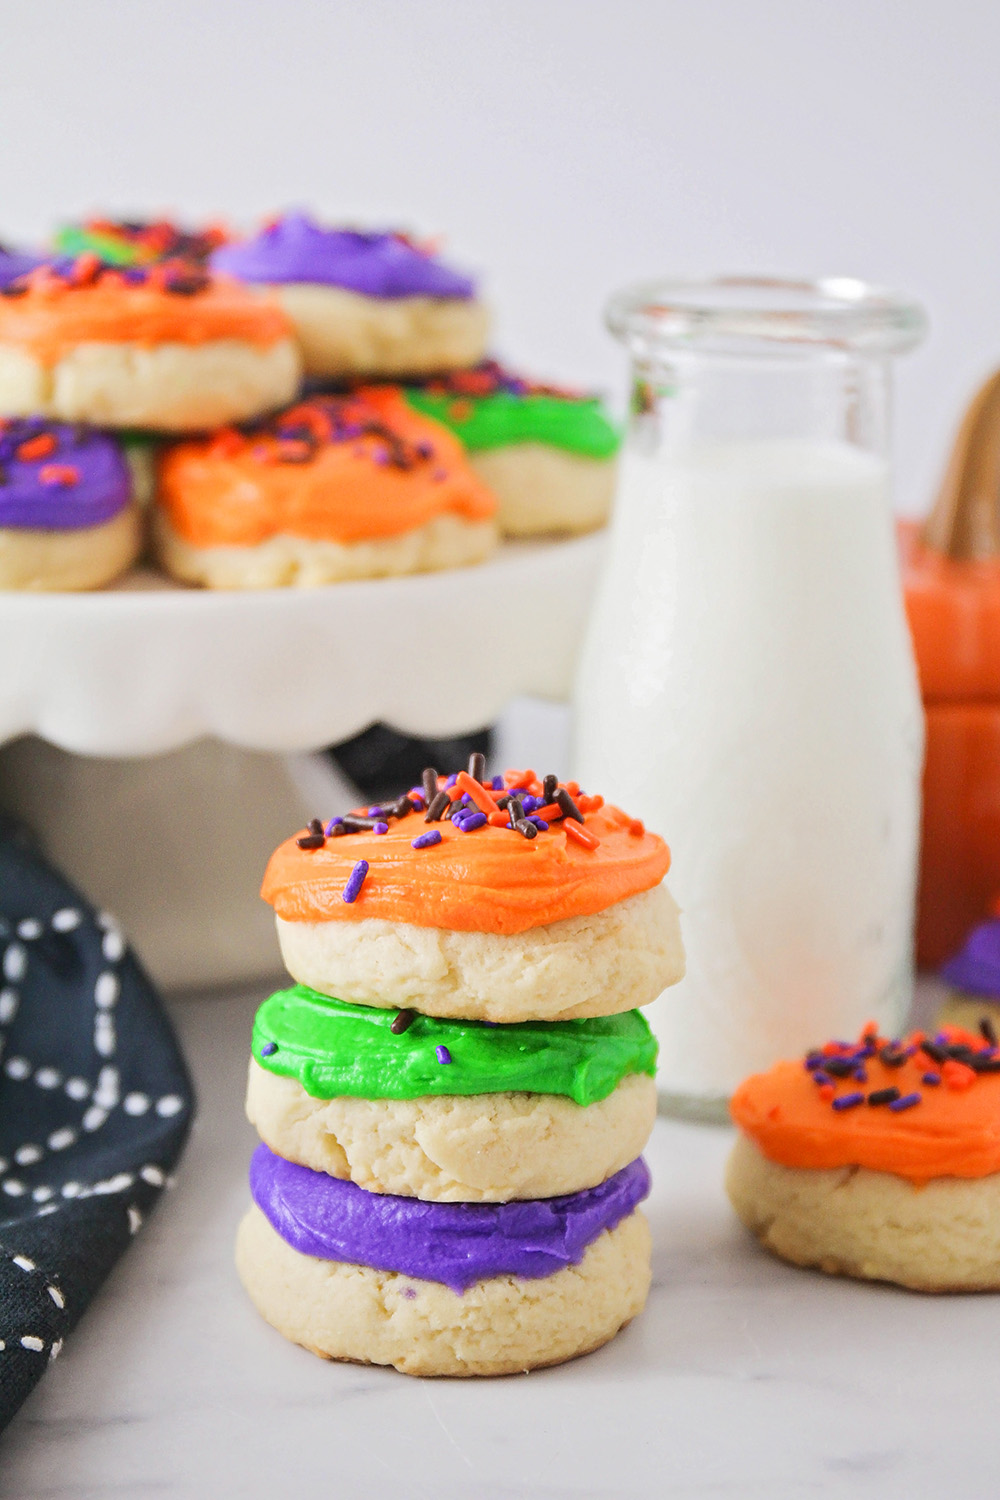 These soft Halloween sugar cookies have the best flavor and texture, and are so quick and easy to make!